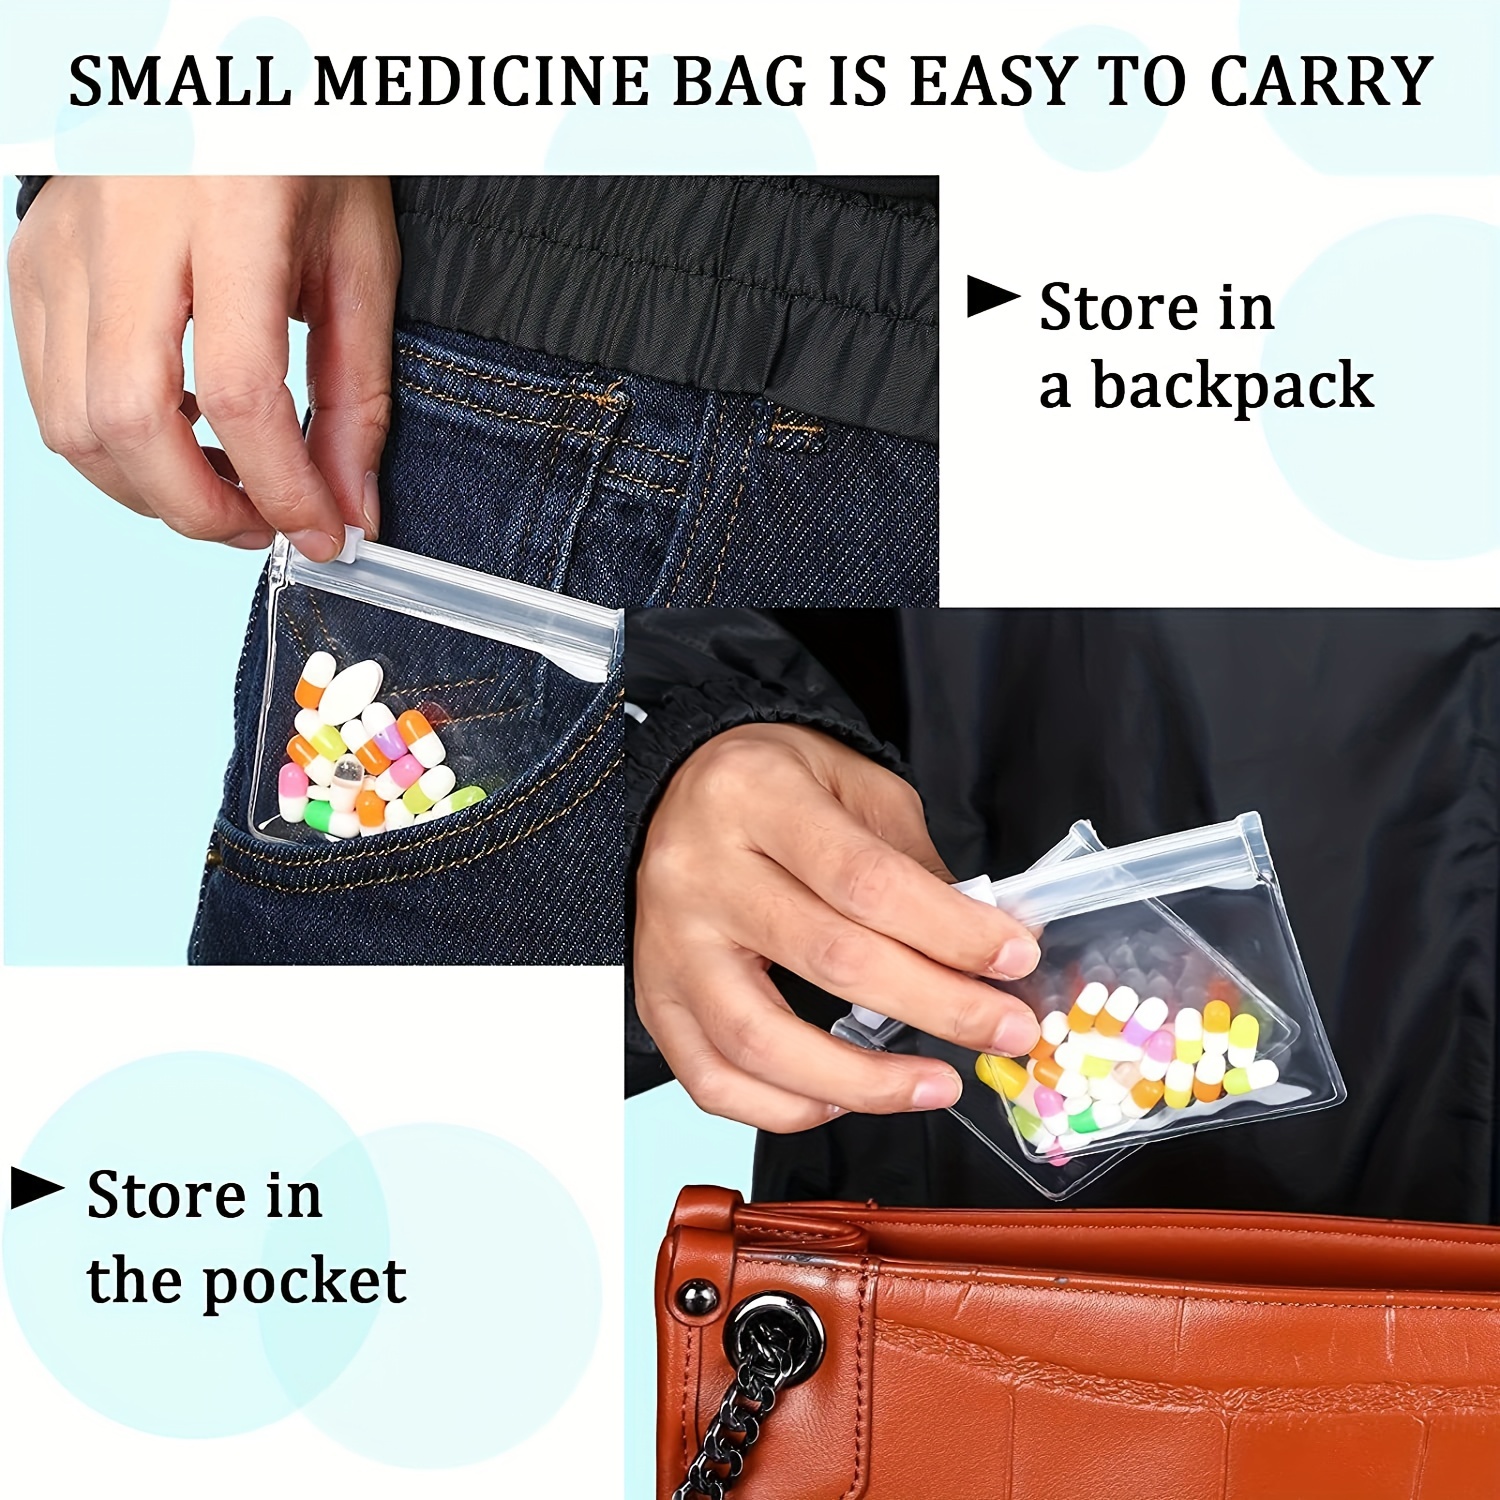 Zippered Pill Pouch Bags - 12 Pcs, Slide Lock Clear Plastic Mini Bags,  BPA-Free for Pills Vitamins, Supplements, Medications, Jewelry, Crafts,  Small Objects - Self-Sealing, Reusable, Travel-Friendly